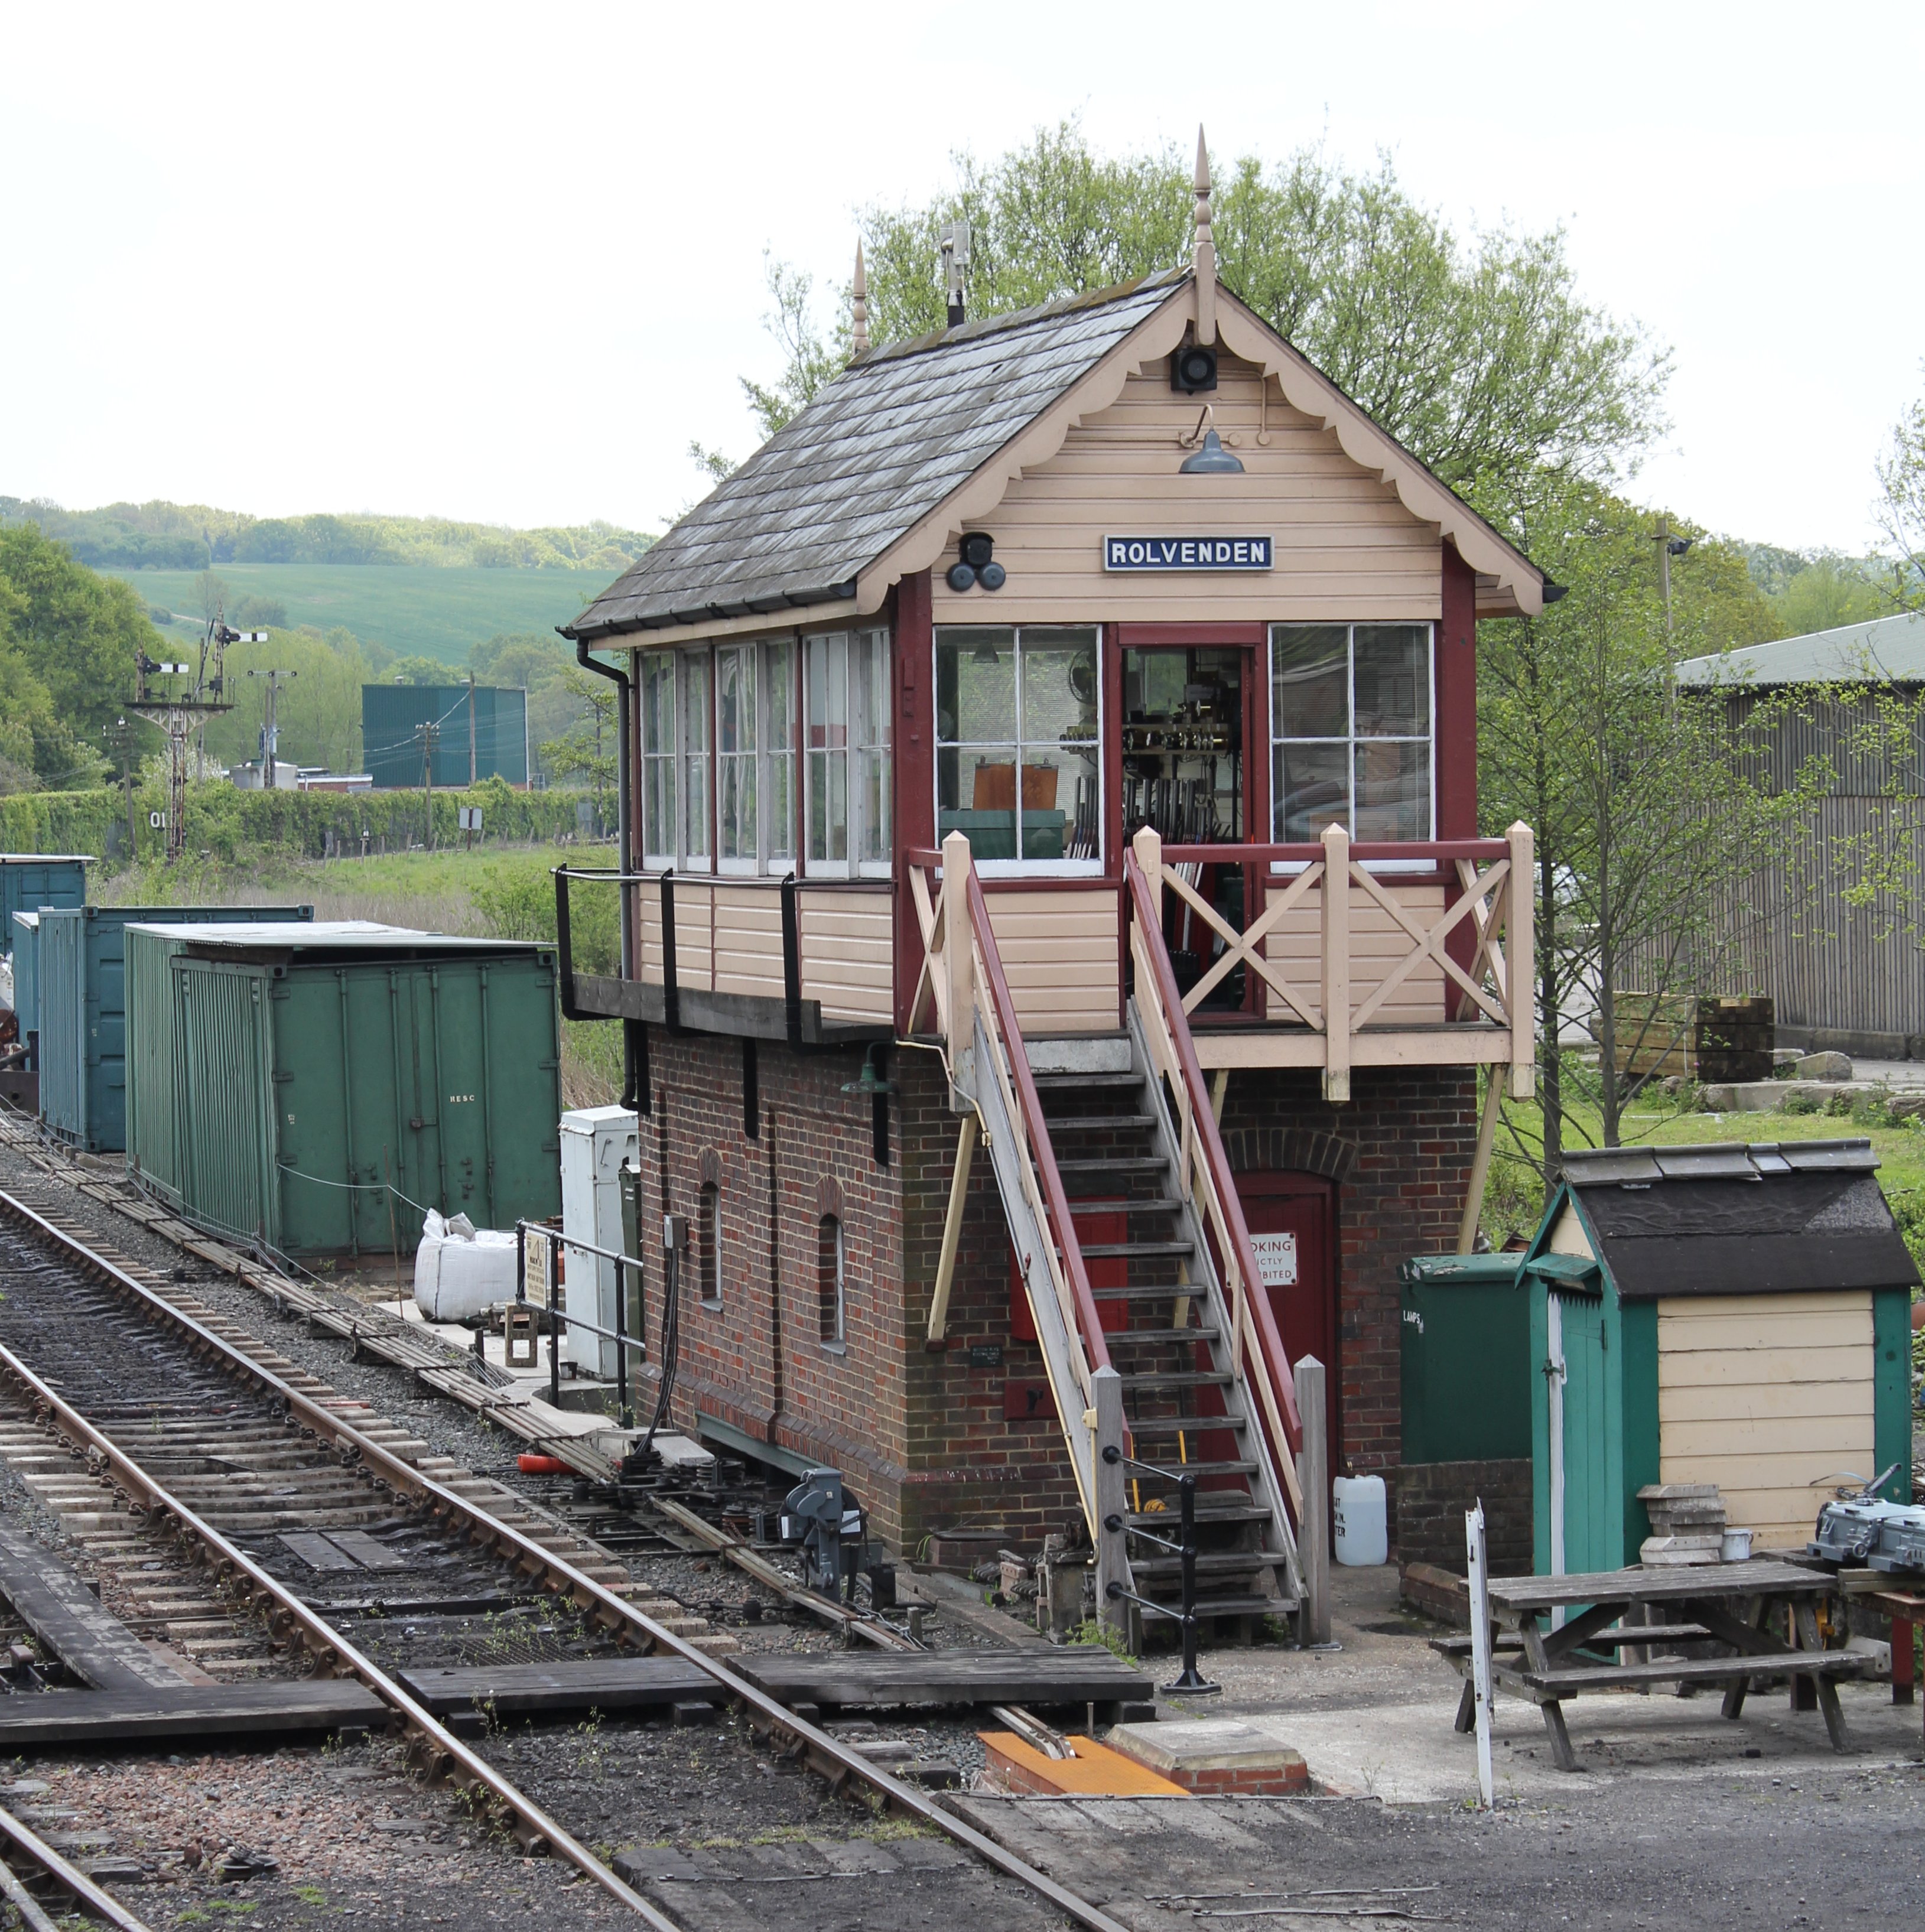 2013 – Kent and East Sussex Railway – Rolvenden – signal box | Loco Yard